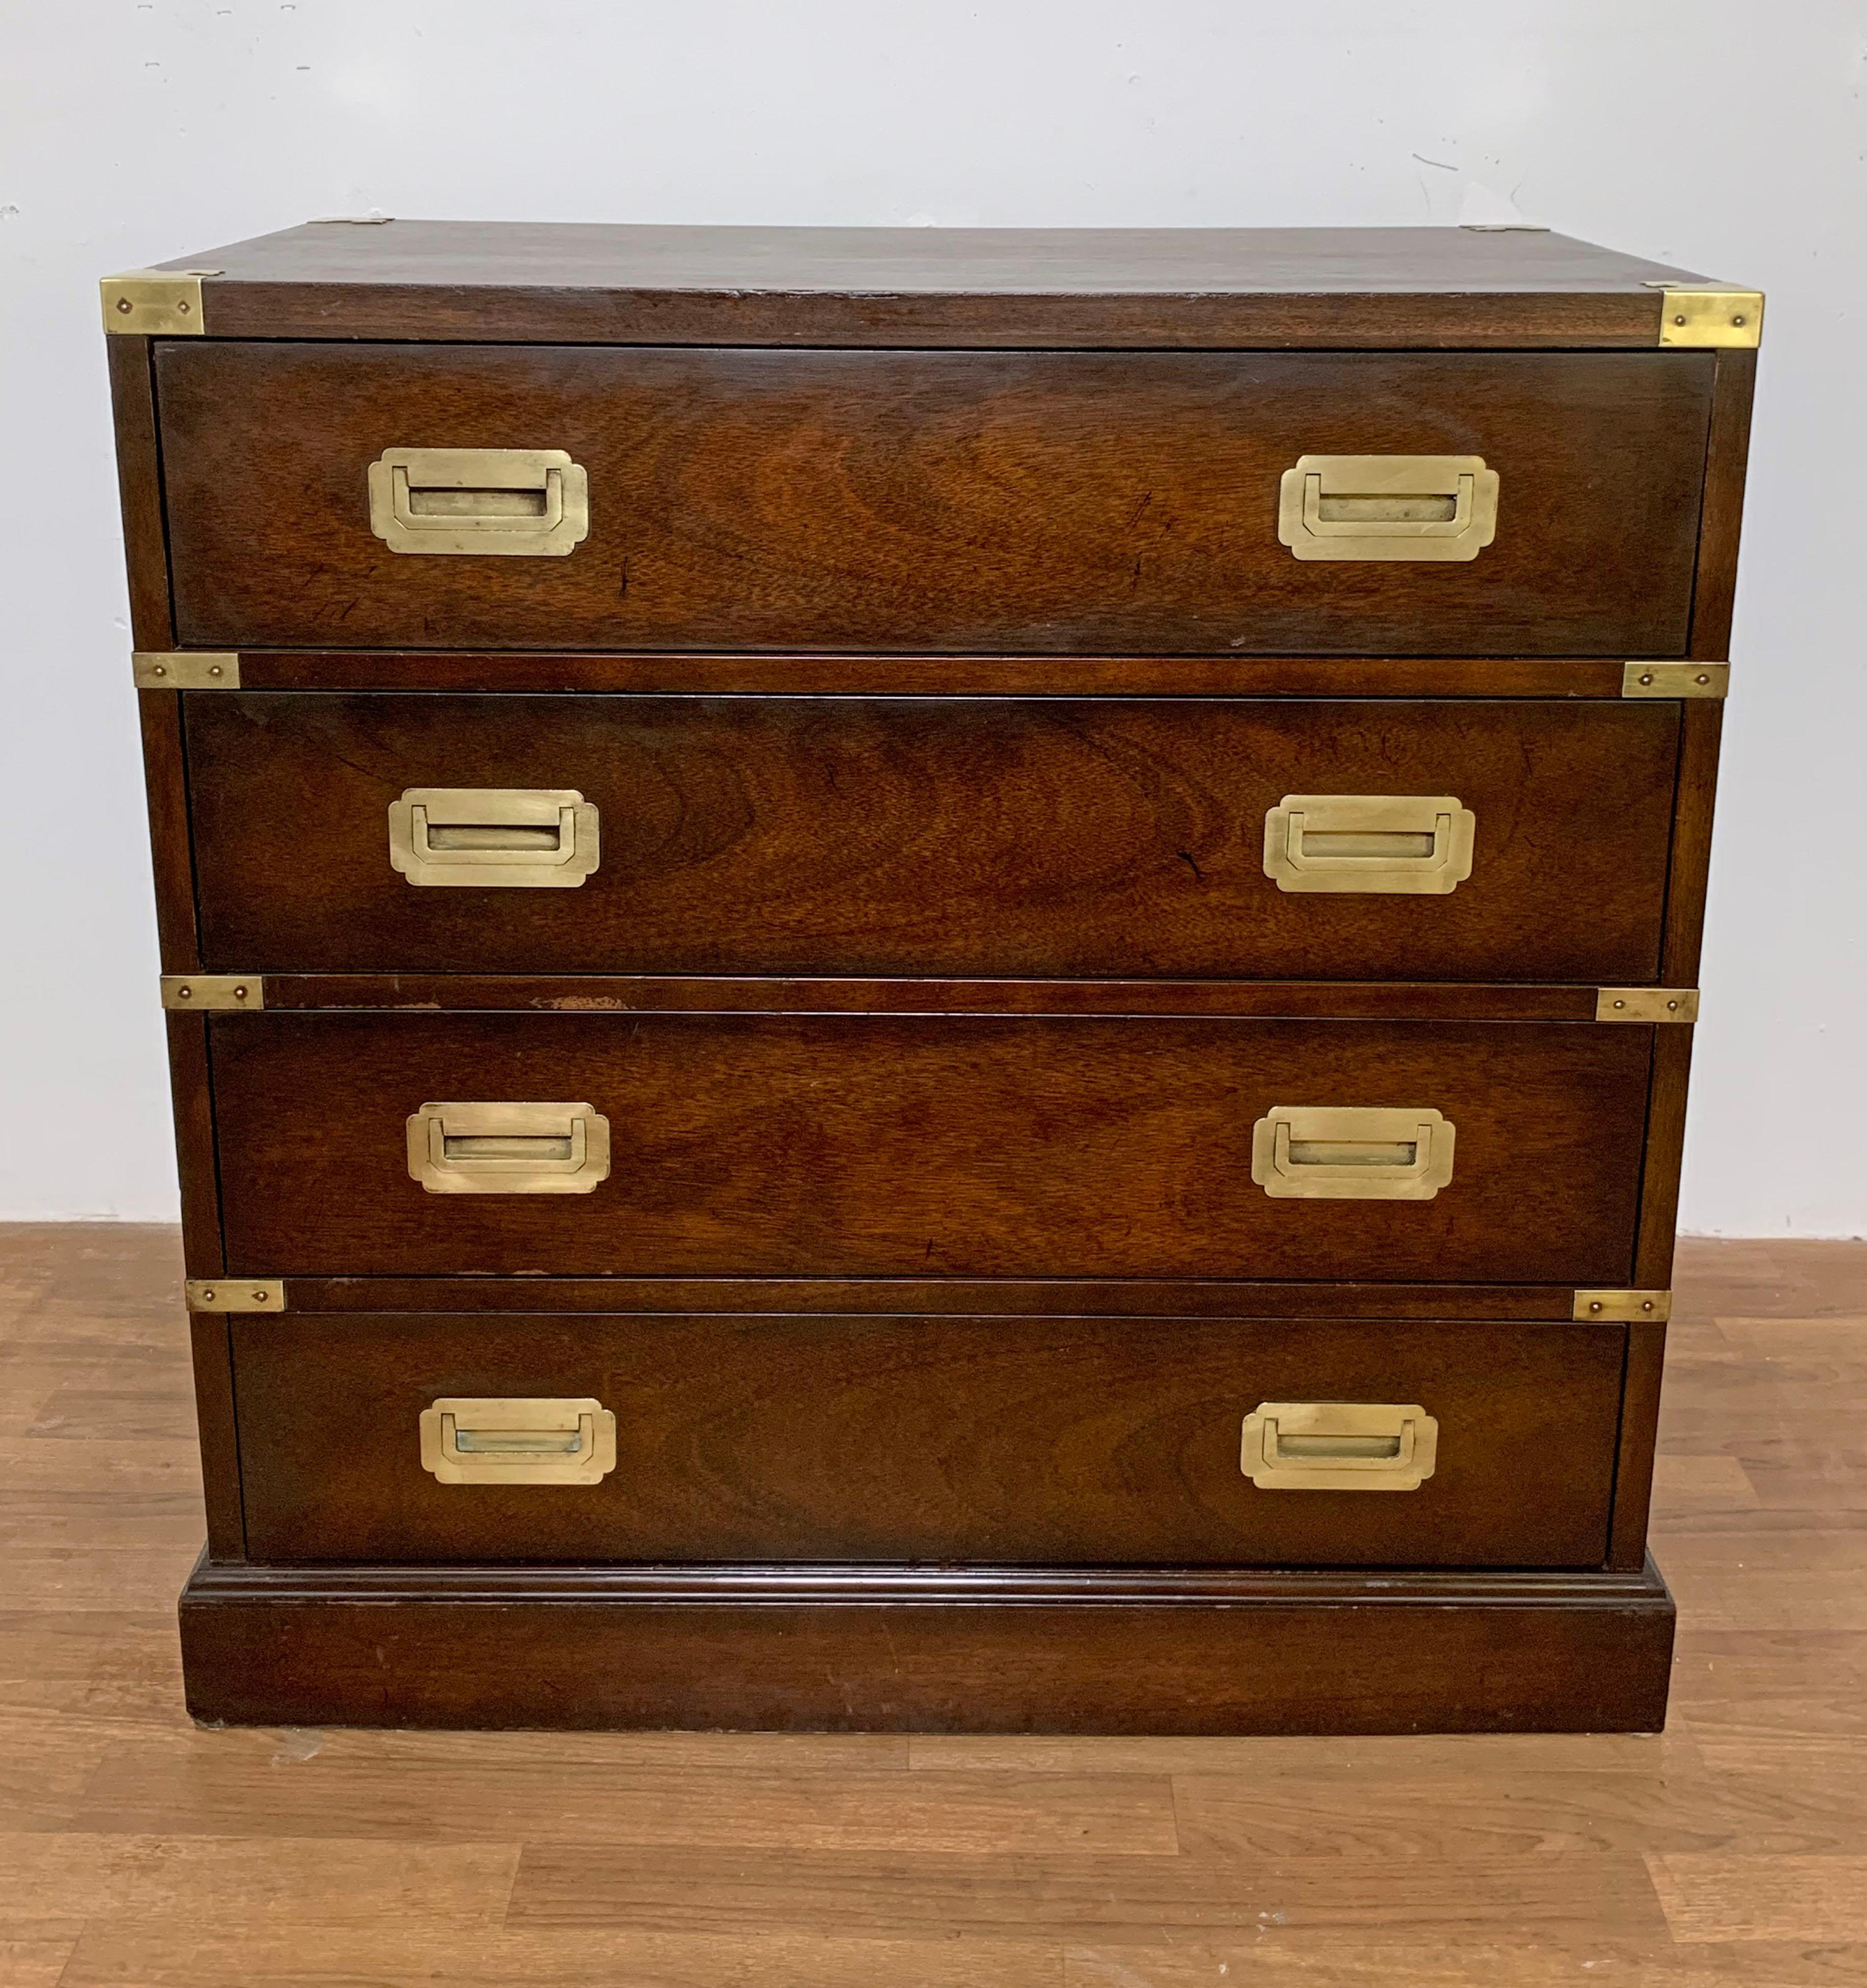 A British made four drawer Campaign style chest of drawers in mahogany, featuring brass corners, strapping on all drawers, baseboard molding and working lift handles.